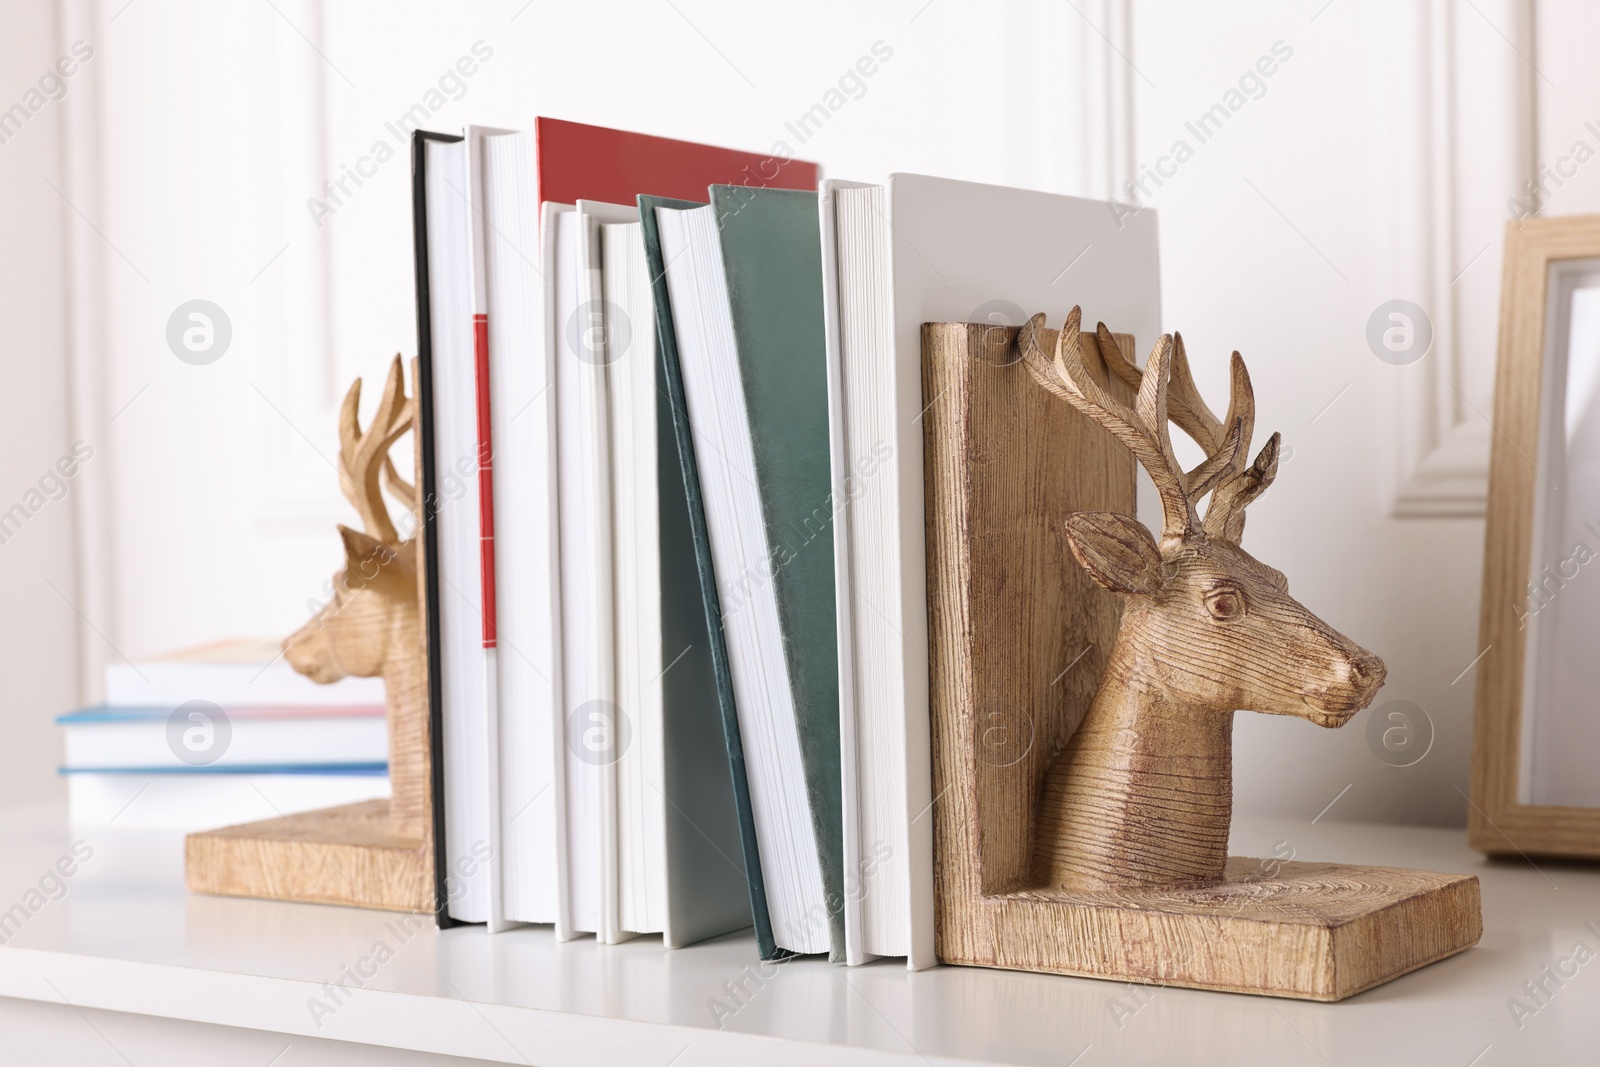 Photo of Wooden deer shaped bookends with books on table indoors